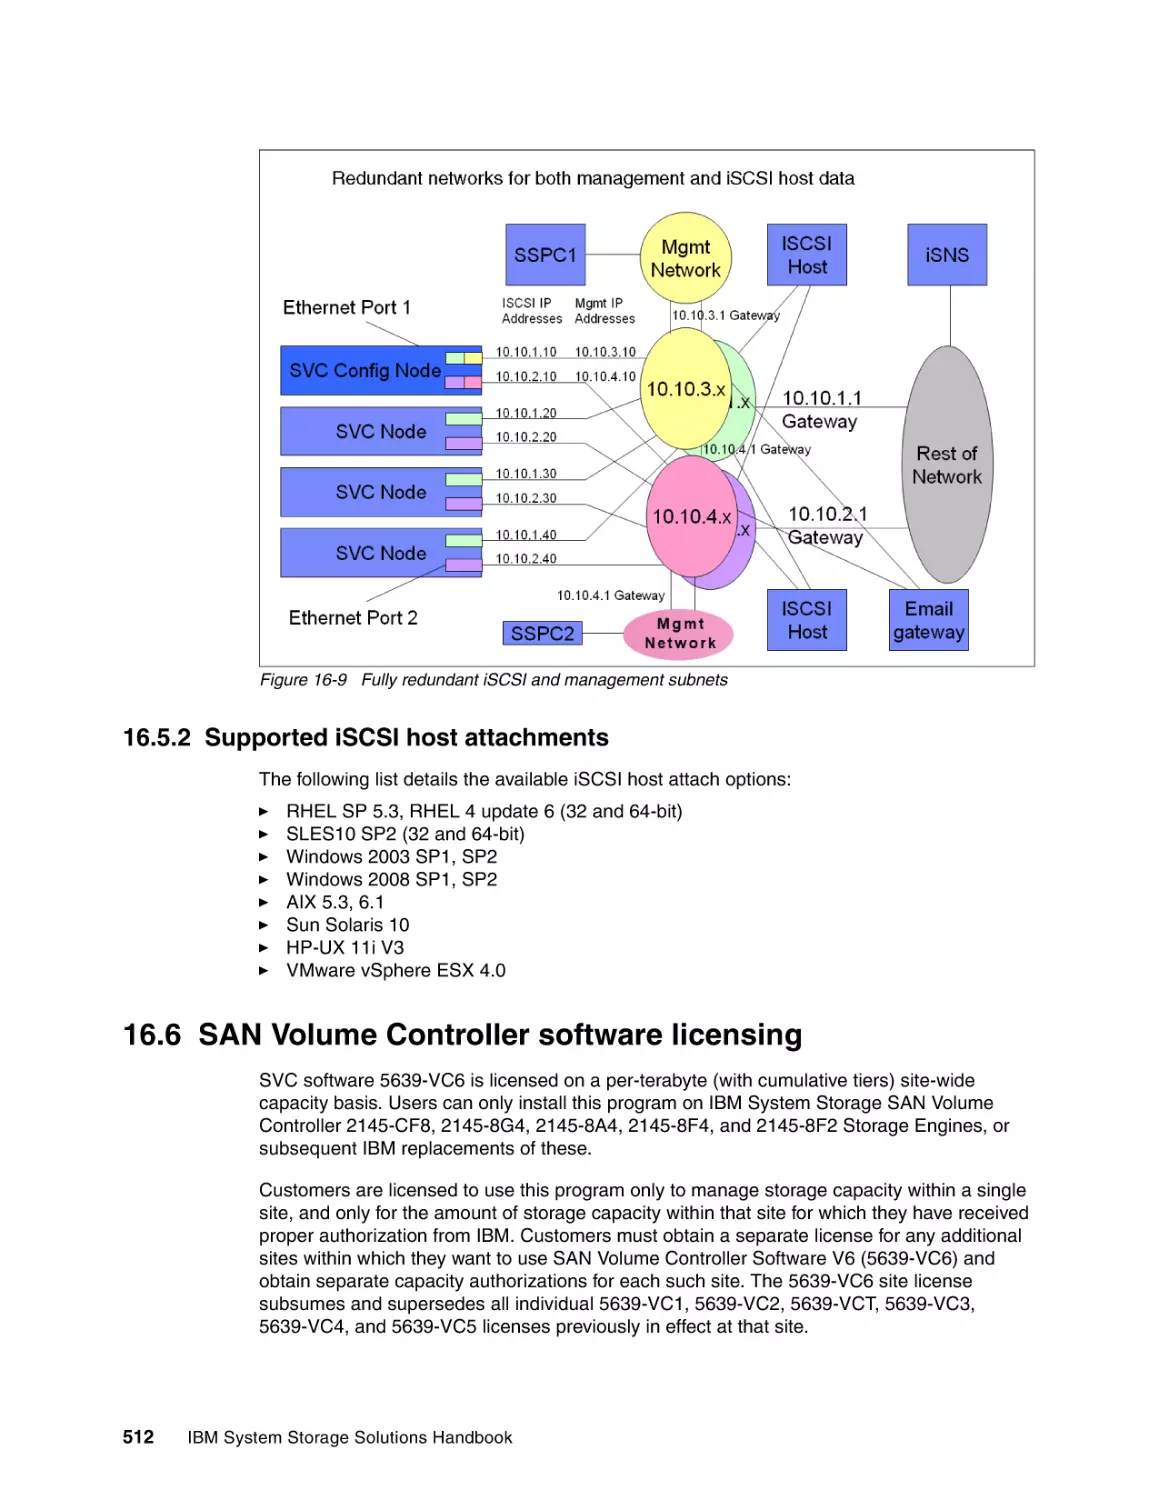 16.5.2 Supported iSCSI host attachments
16.6 SAN Volume Controller software licensing